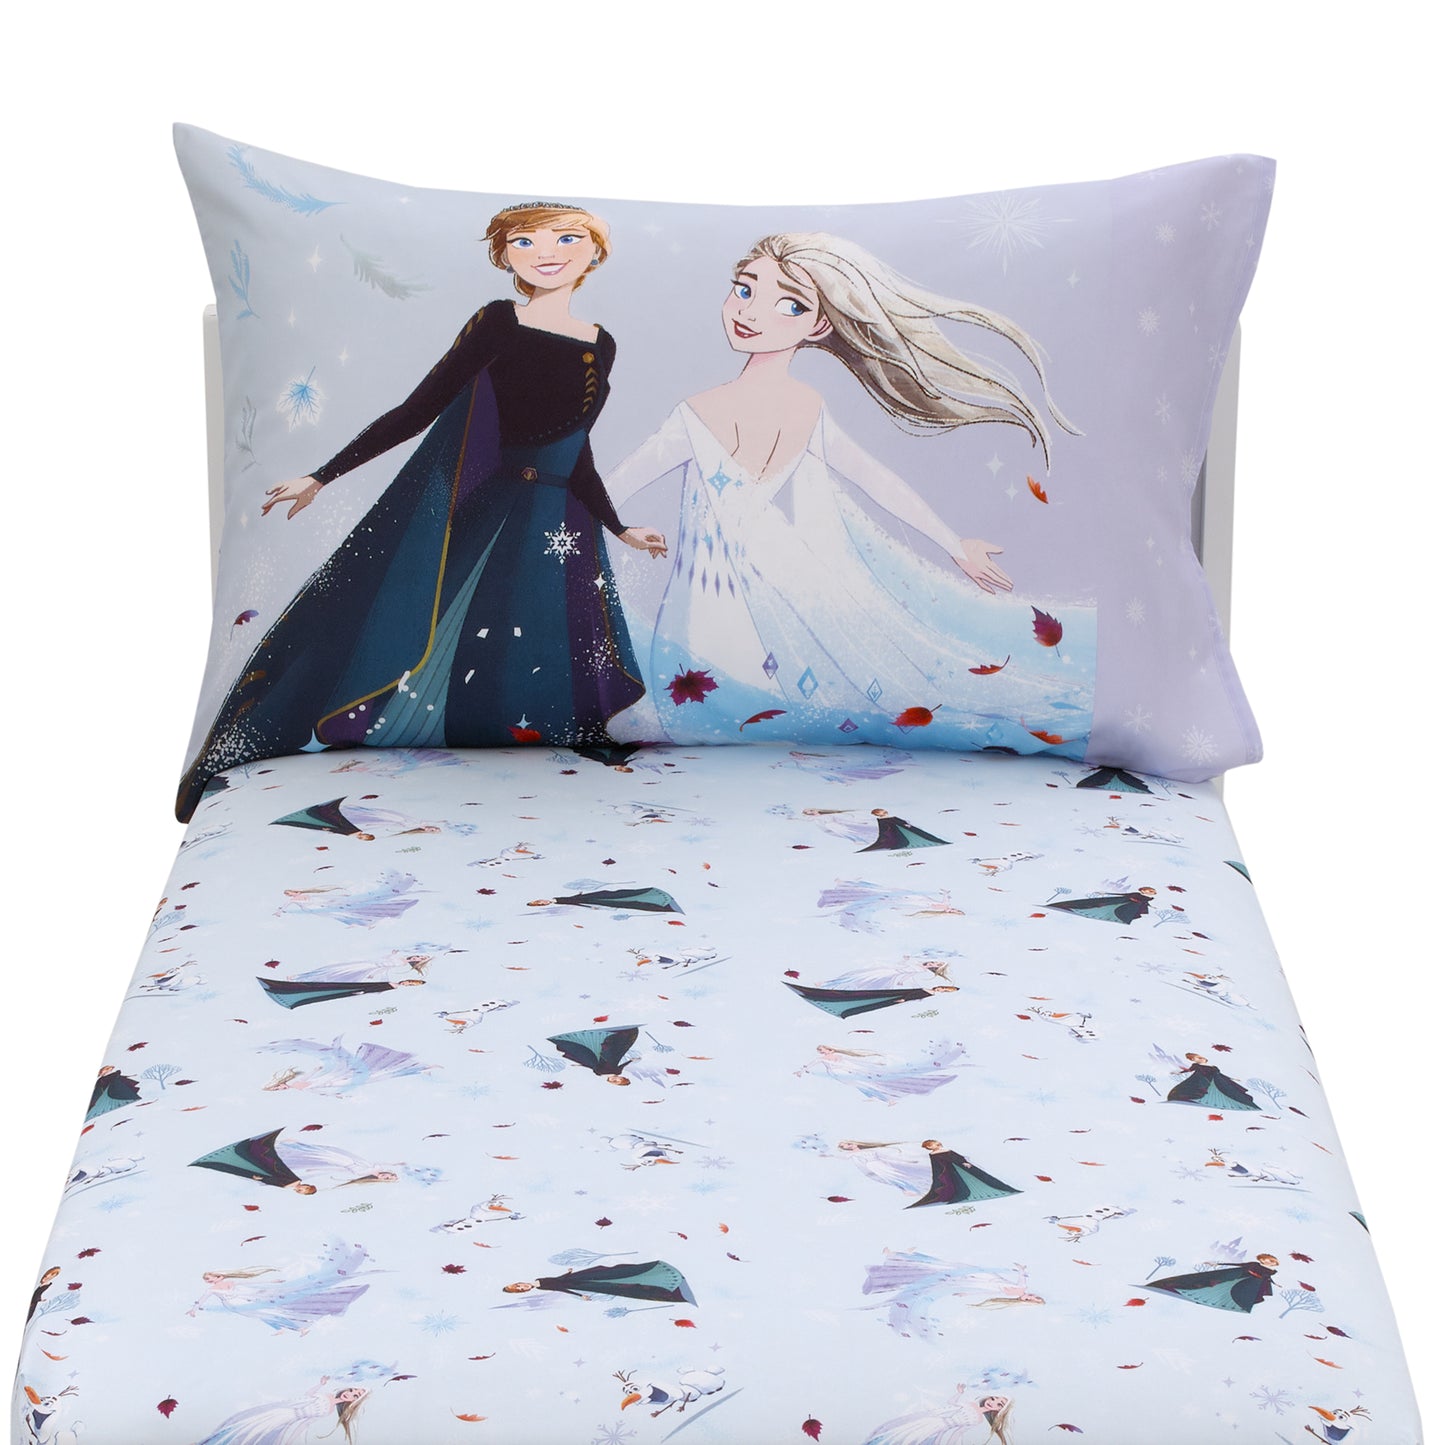 Disney Frozen Winter Cheer Lavender, Aqua and White Anna, Elsa and Olaf 2 Piece Toddler Sheet Set - Fitted Bottom Sheet and Reversible Pillowcase